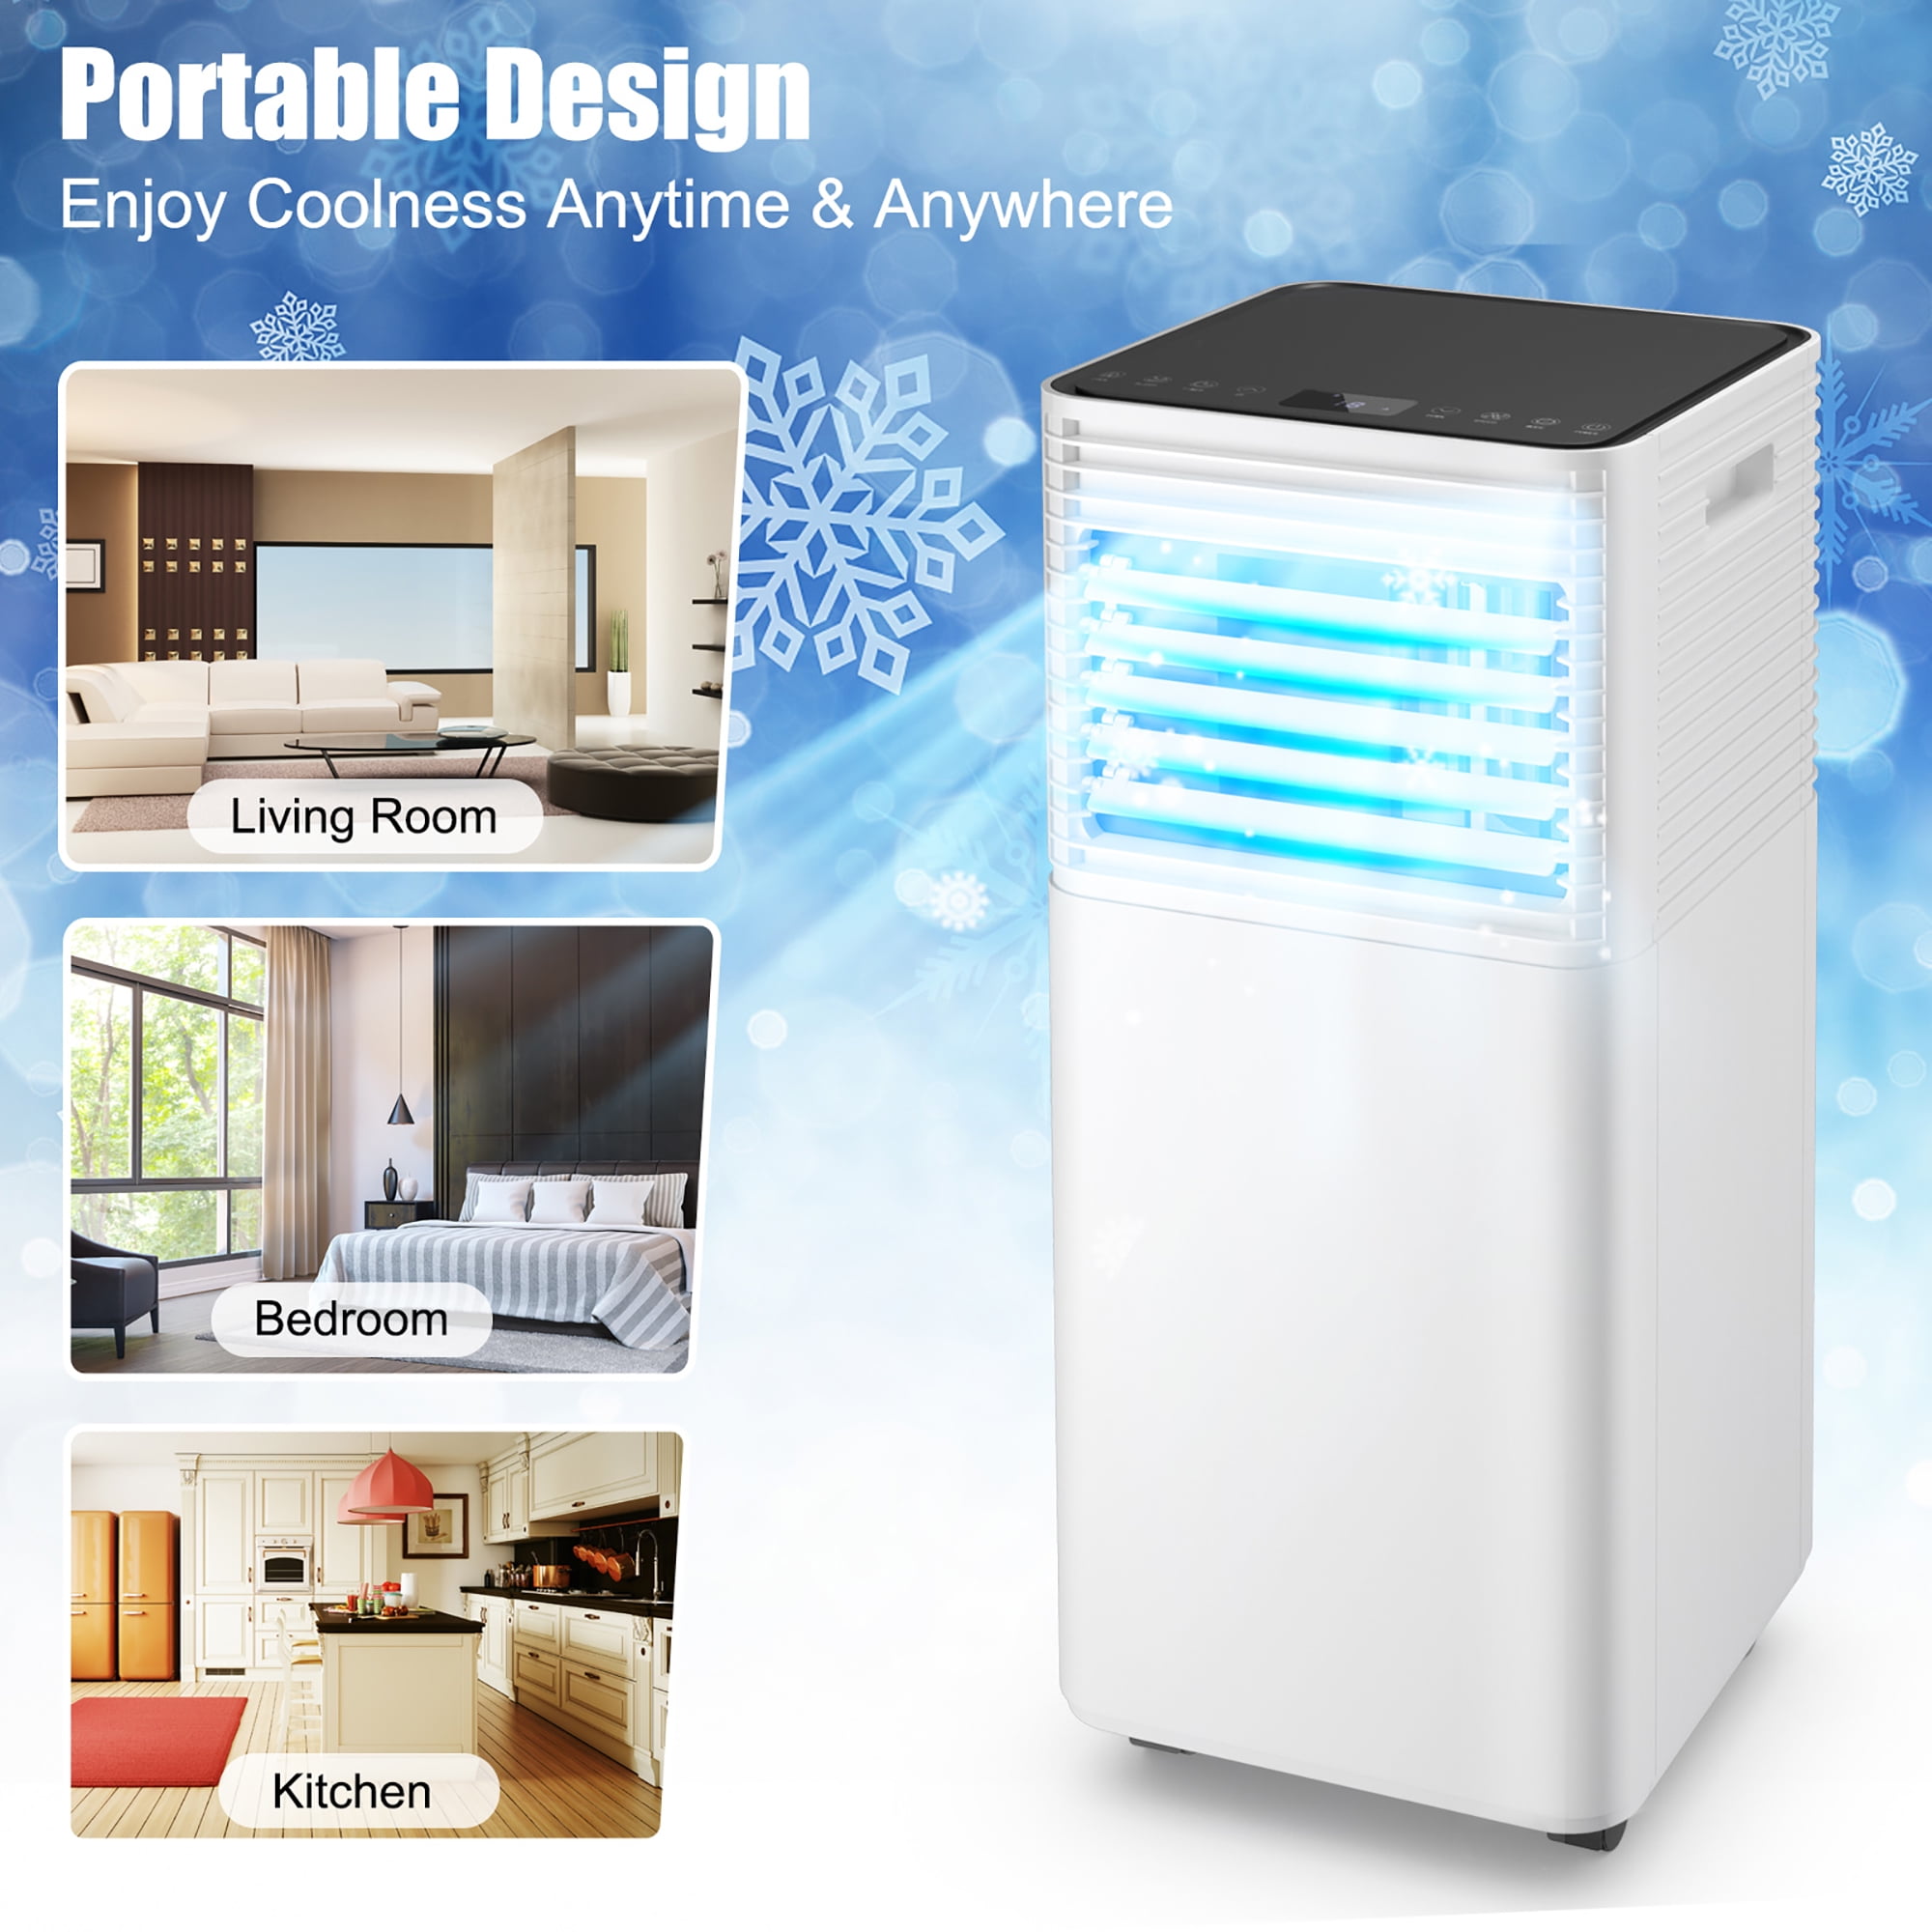  COSTWAY 8000 BTU Portable Air Conditioner, 4-in-1 AC Unit with  Cool, Fan, Dehumidifier & Sleep Mode for Rooms up to 250 Sq.Ft, 24H Timer,  Child Lock, Remote Control & Window Kit (